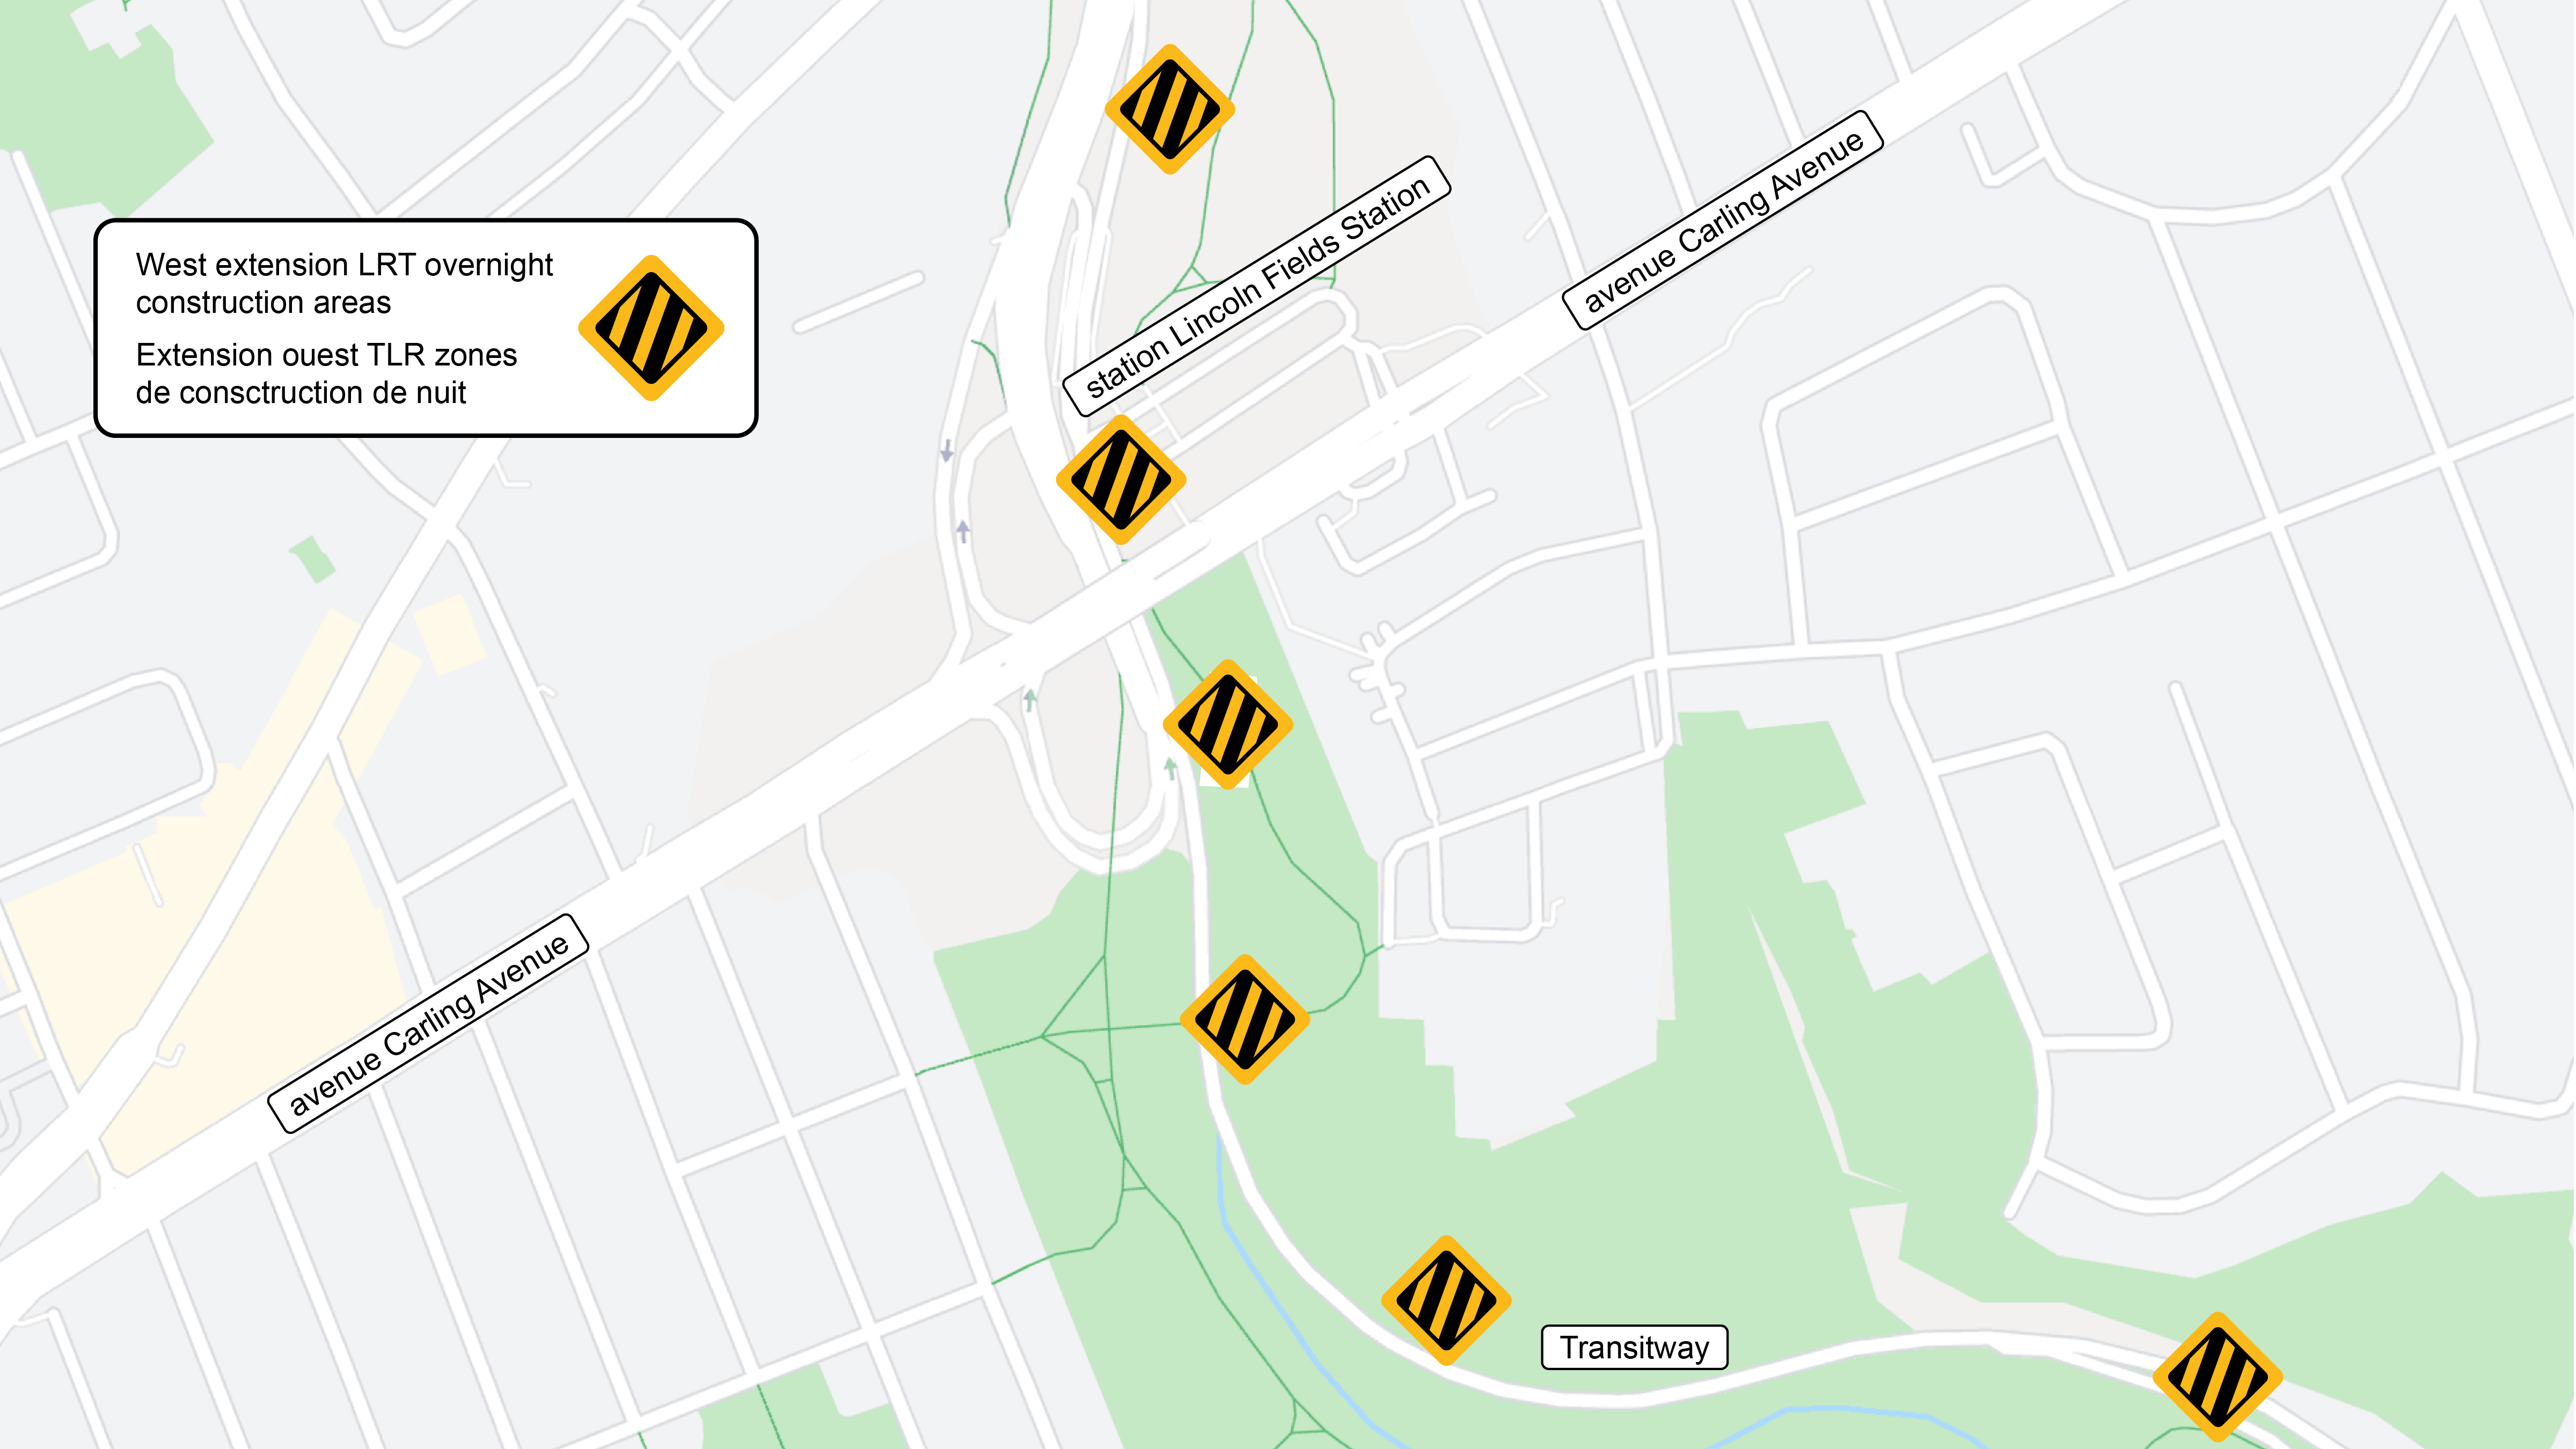 map of Lincoln Fields, Carling, and Pinecrest Creek Corridor south to Connaught Park. Image has 6 construction hazard signs demonstrating approximate work zones along the existing Transitway.